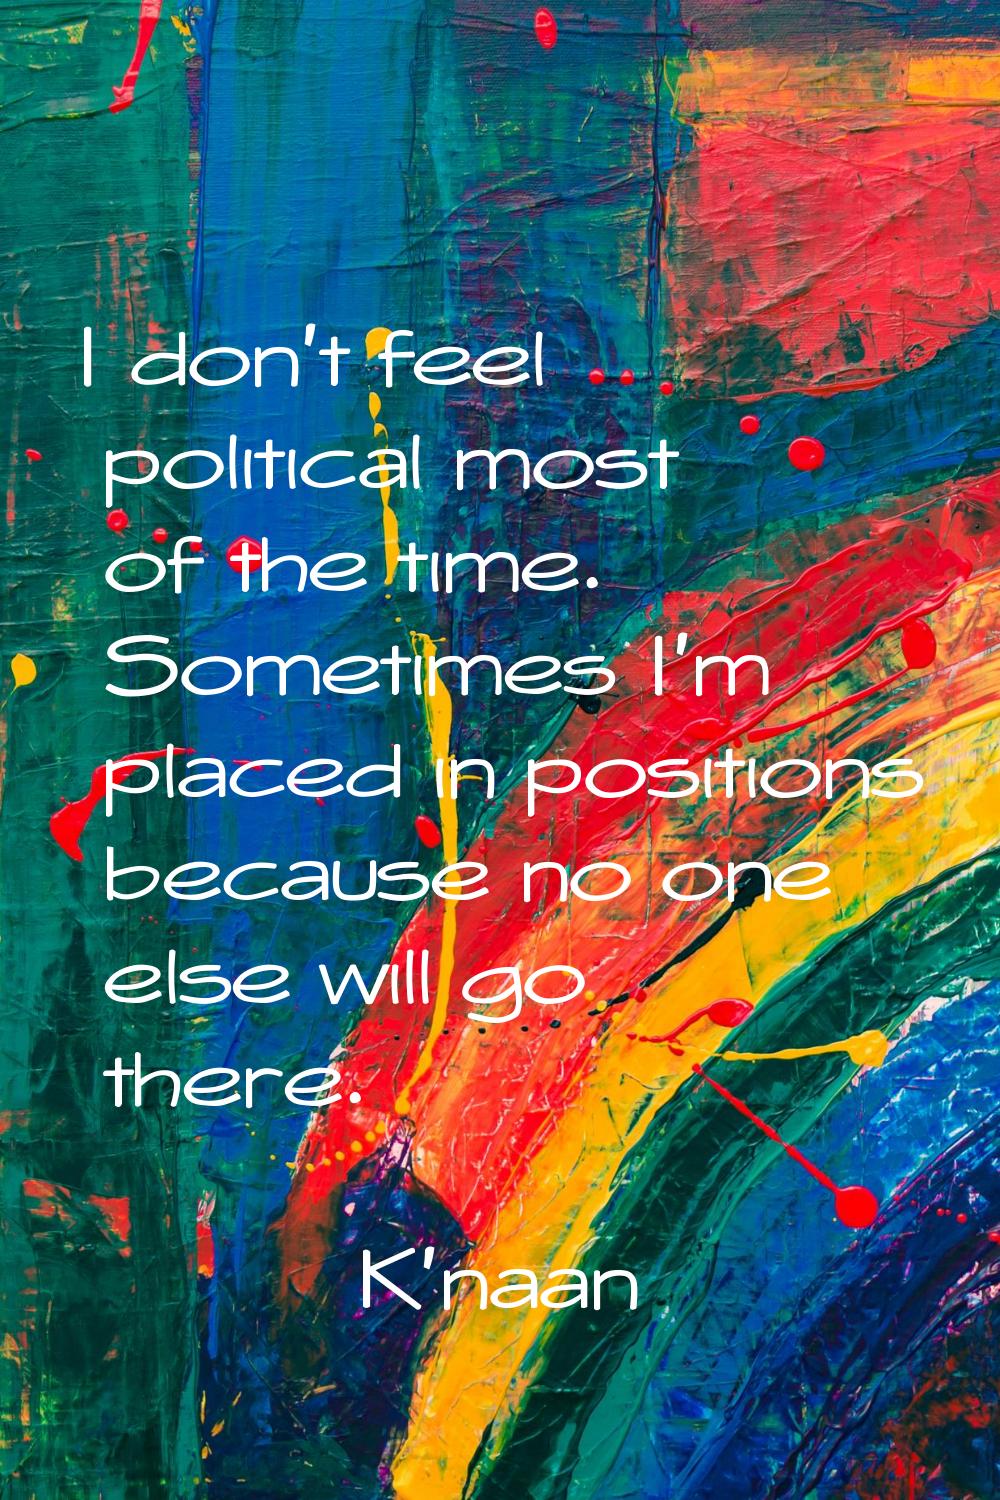 I don't feel political most of the time. Sometimes I'm placed in positions because no one else will